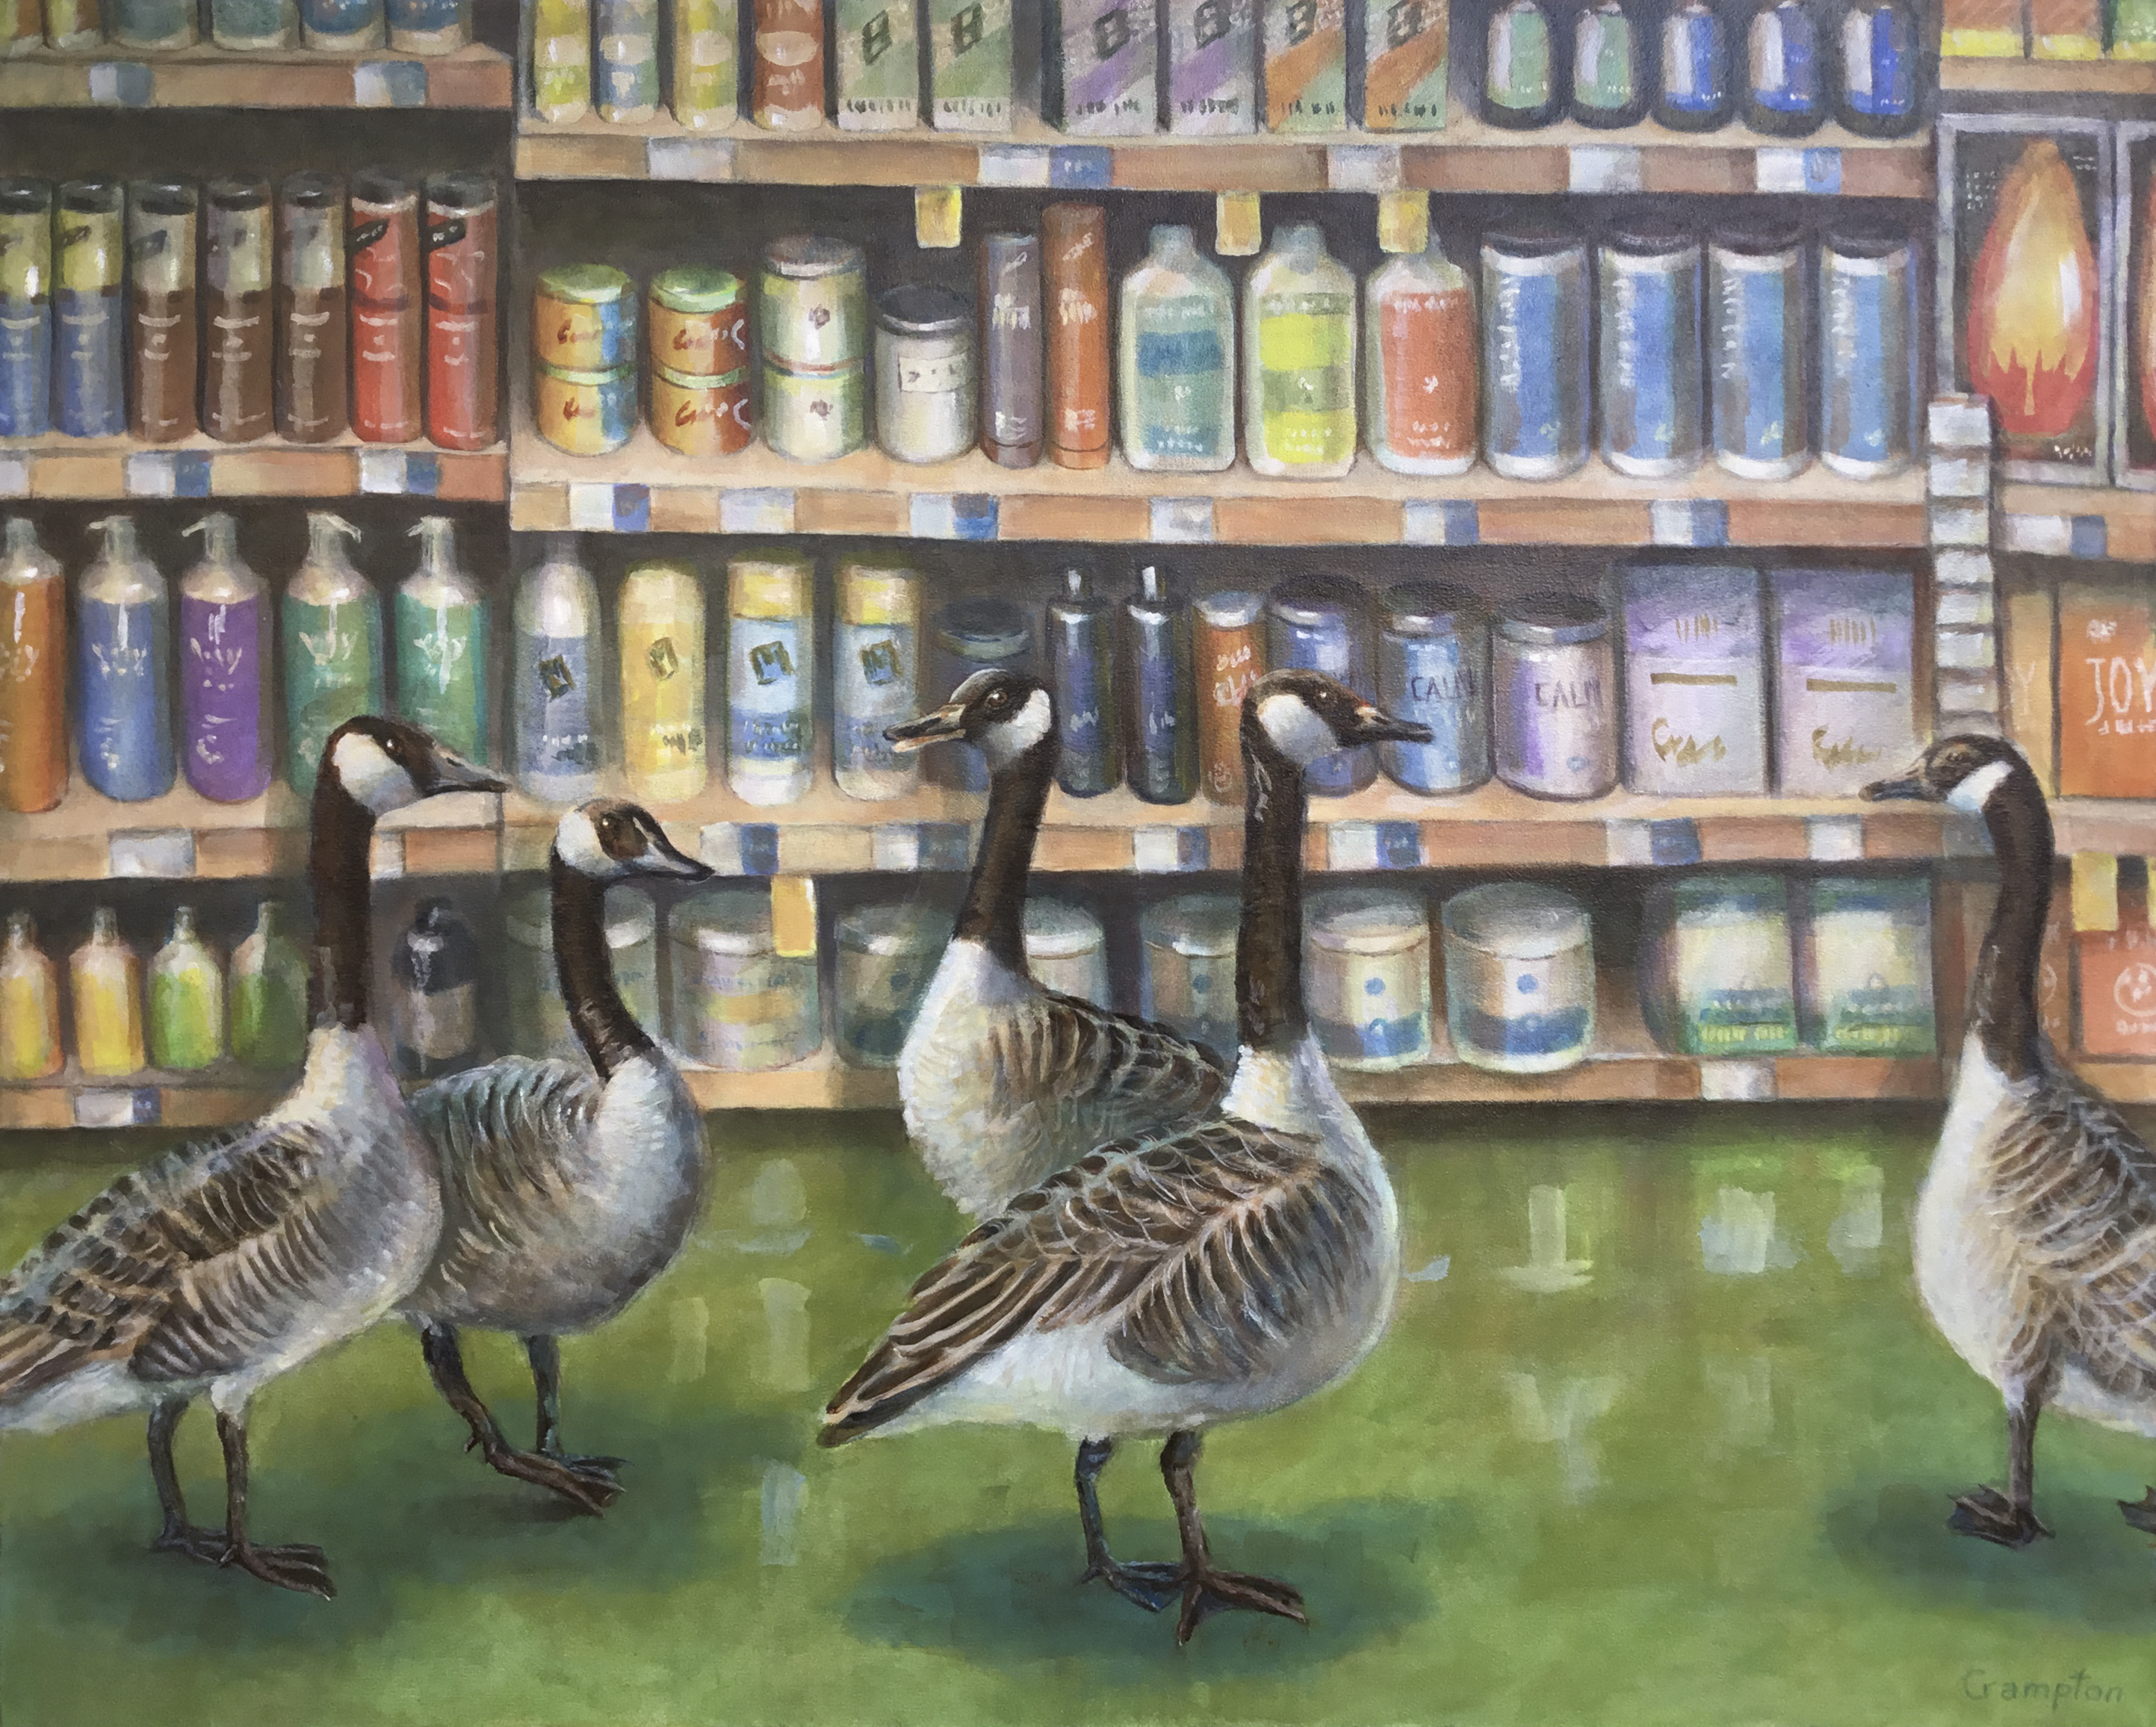 painting of geese inside store with bottles on shelves